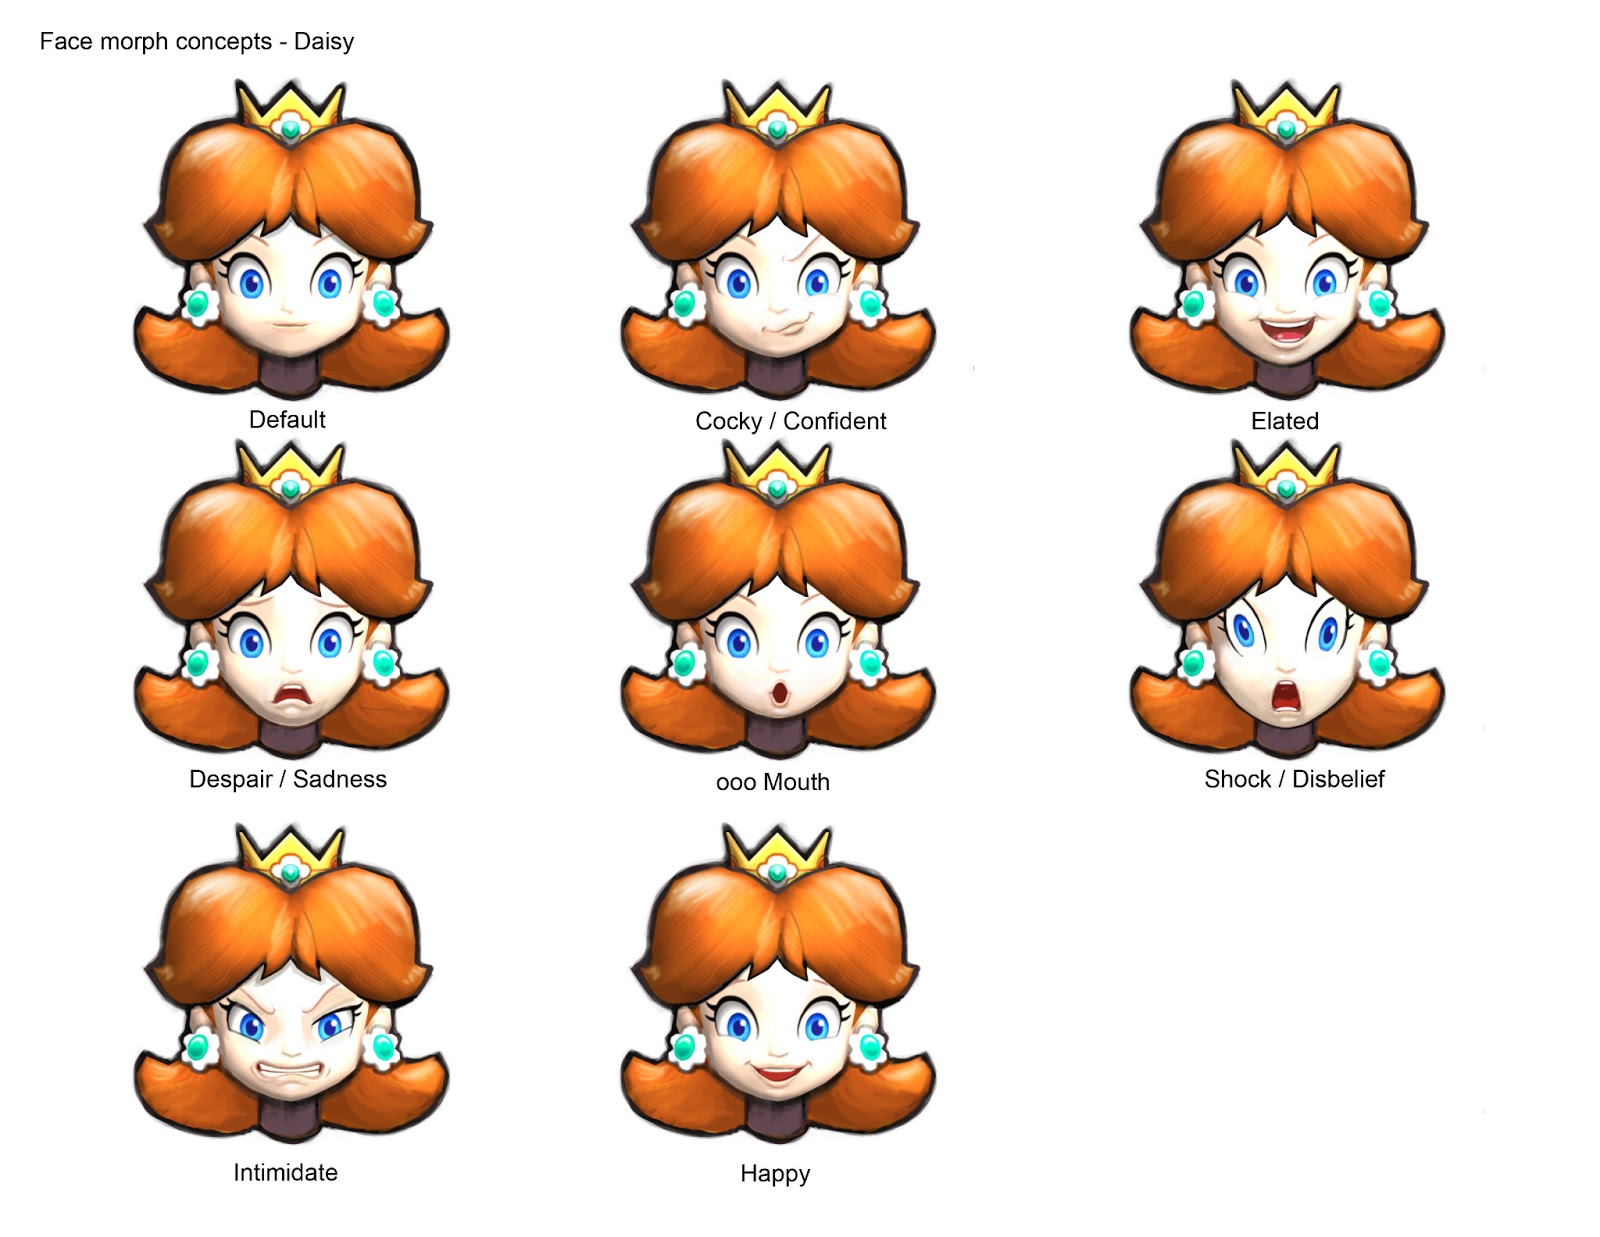 mario strikers charged daisy